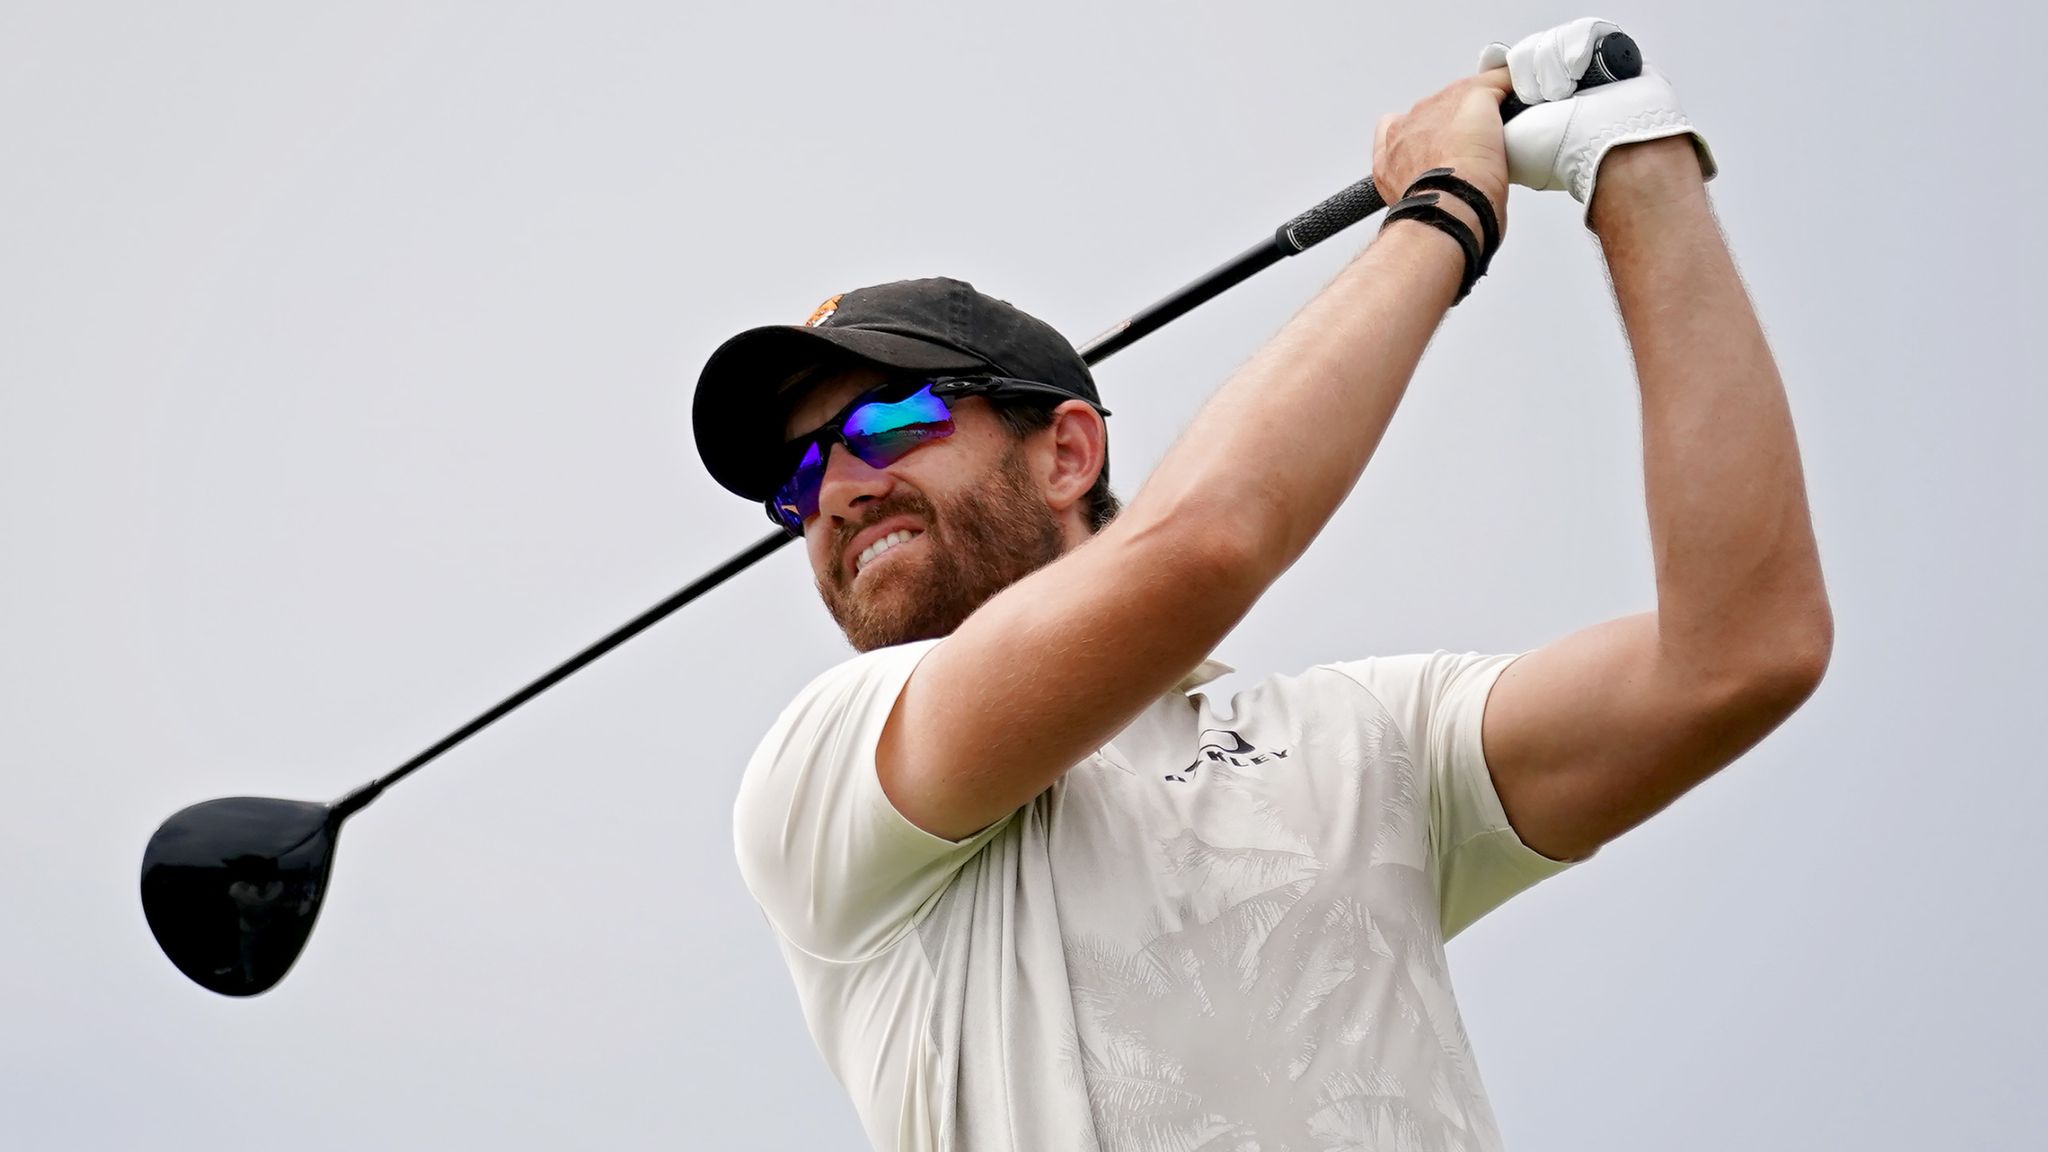 Patrick Rodgers leads by one shot at Valero Texas Open seeking first PGA Tour title of his career Golf News Sky Sports